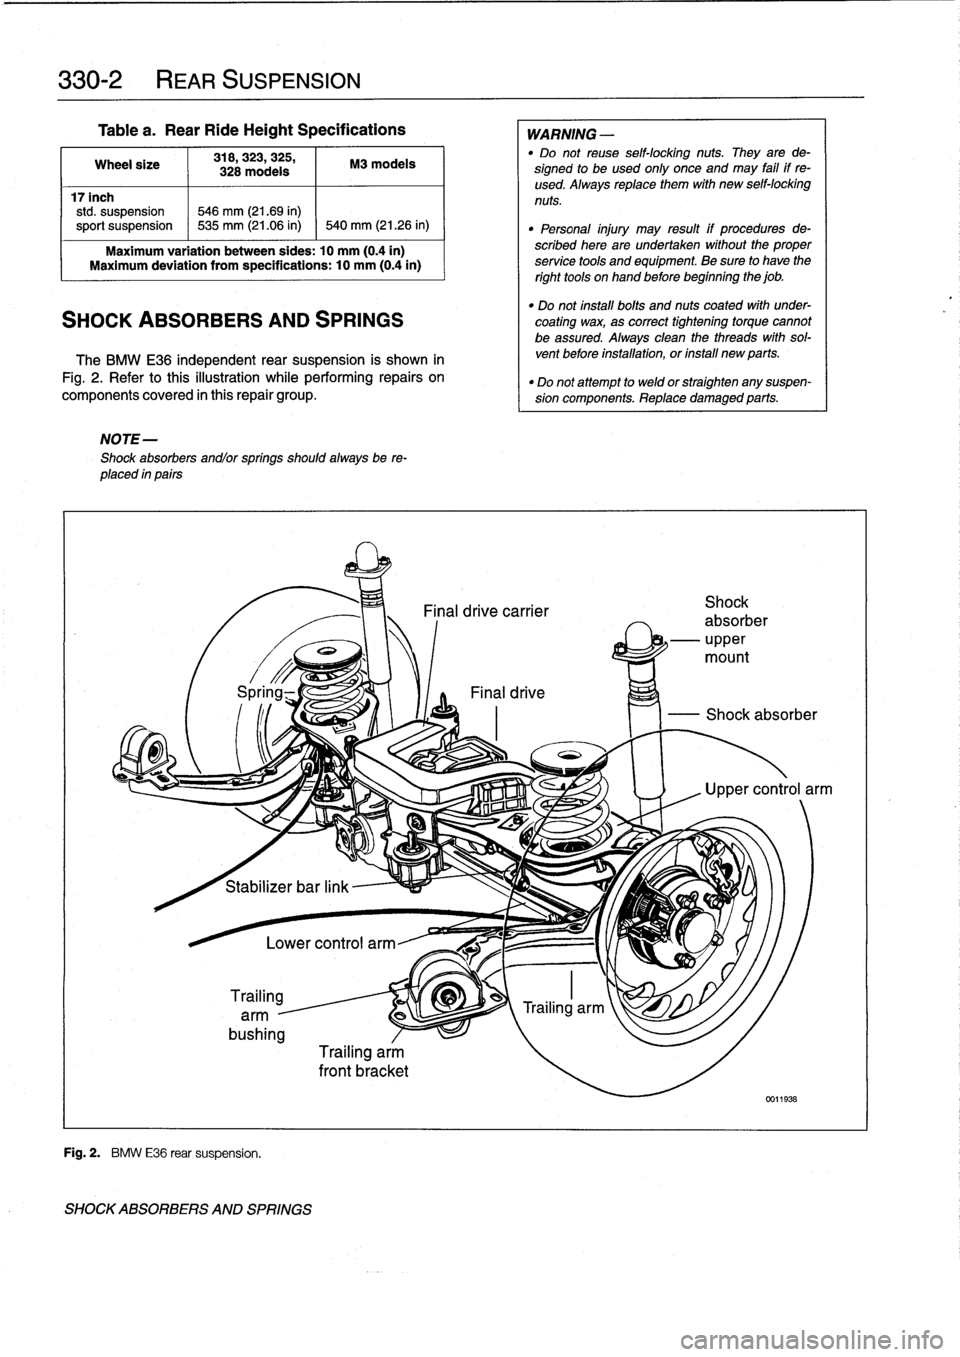 BMW 328i 1995 E36 Workshop Manual 
330-2

	

REAR
SUSPENSION

Table
a
.
Rear
RideHeight
Specifications

Wheel
size

	

318,323,
325,

	

M3
modeis
328
modeis

17inch
std
.
suspension

	

546
mm
(21.69
in)
sport
suspension

	

~
535
mm